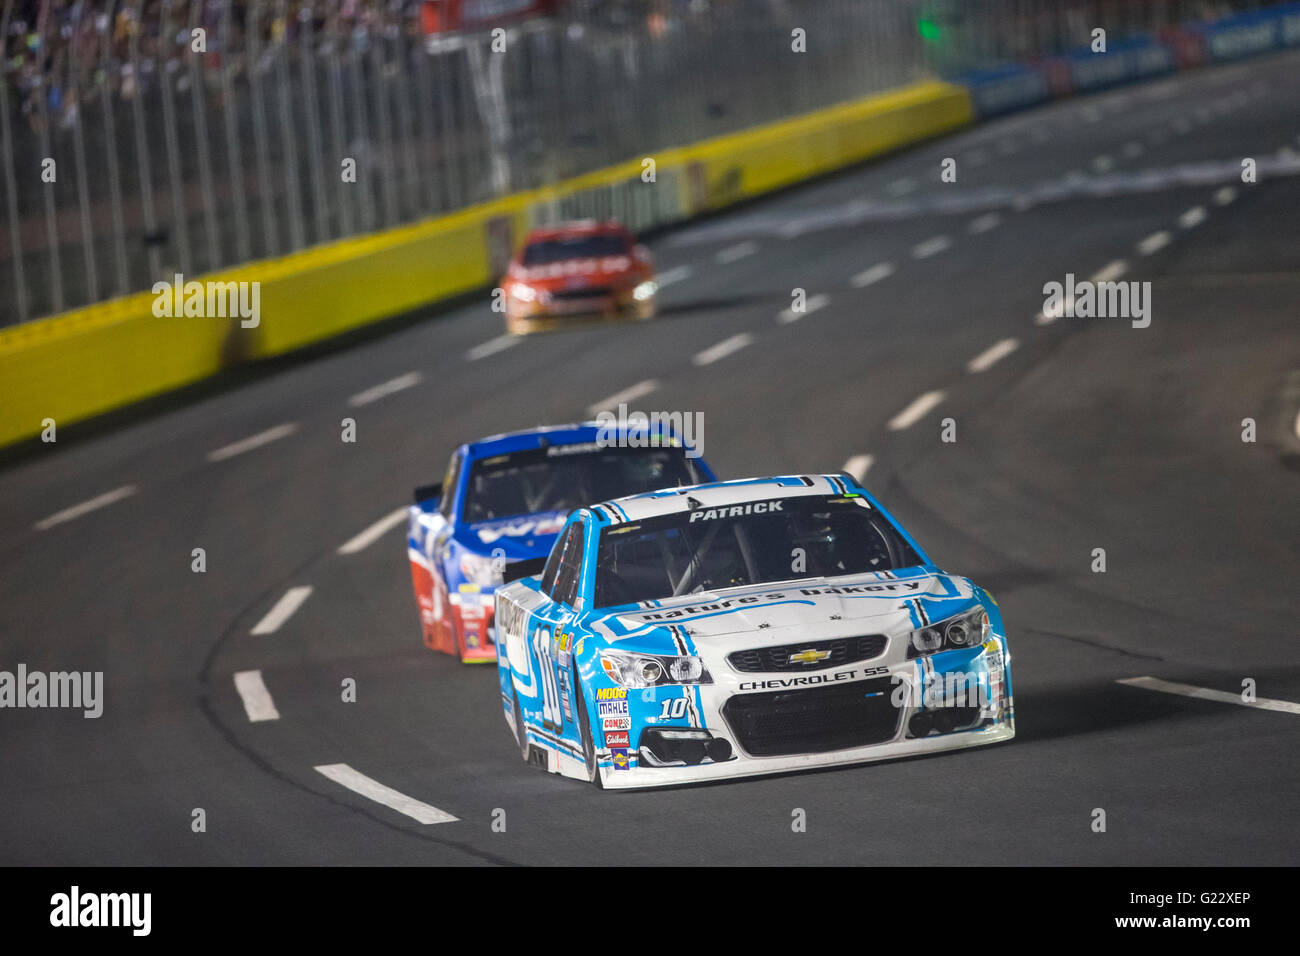 Concord, NC, USA. 21st May, 2016. Concord, NC - May 21, 2016: Danica Patrick (10) battles for position during The Sprint All-Star Race at the Charlotte Motor Speedway in Concord, NC. © csm/Alamy Live News Stock Photo